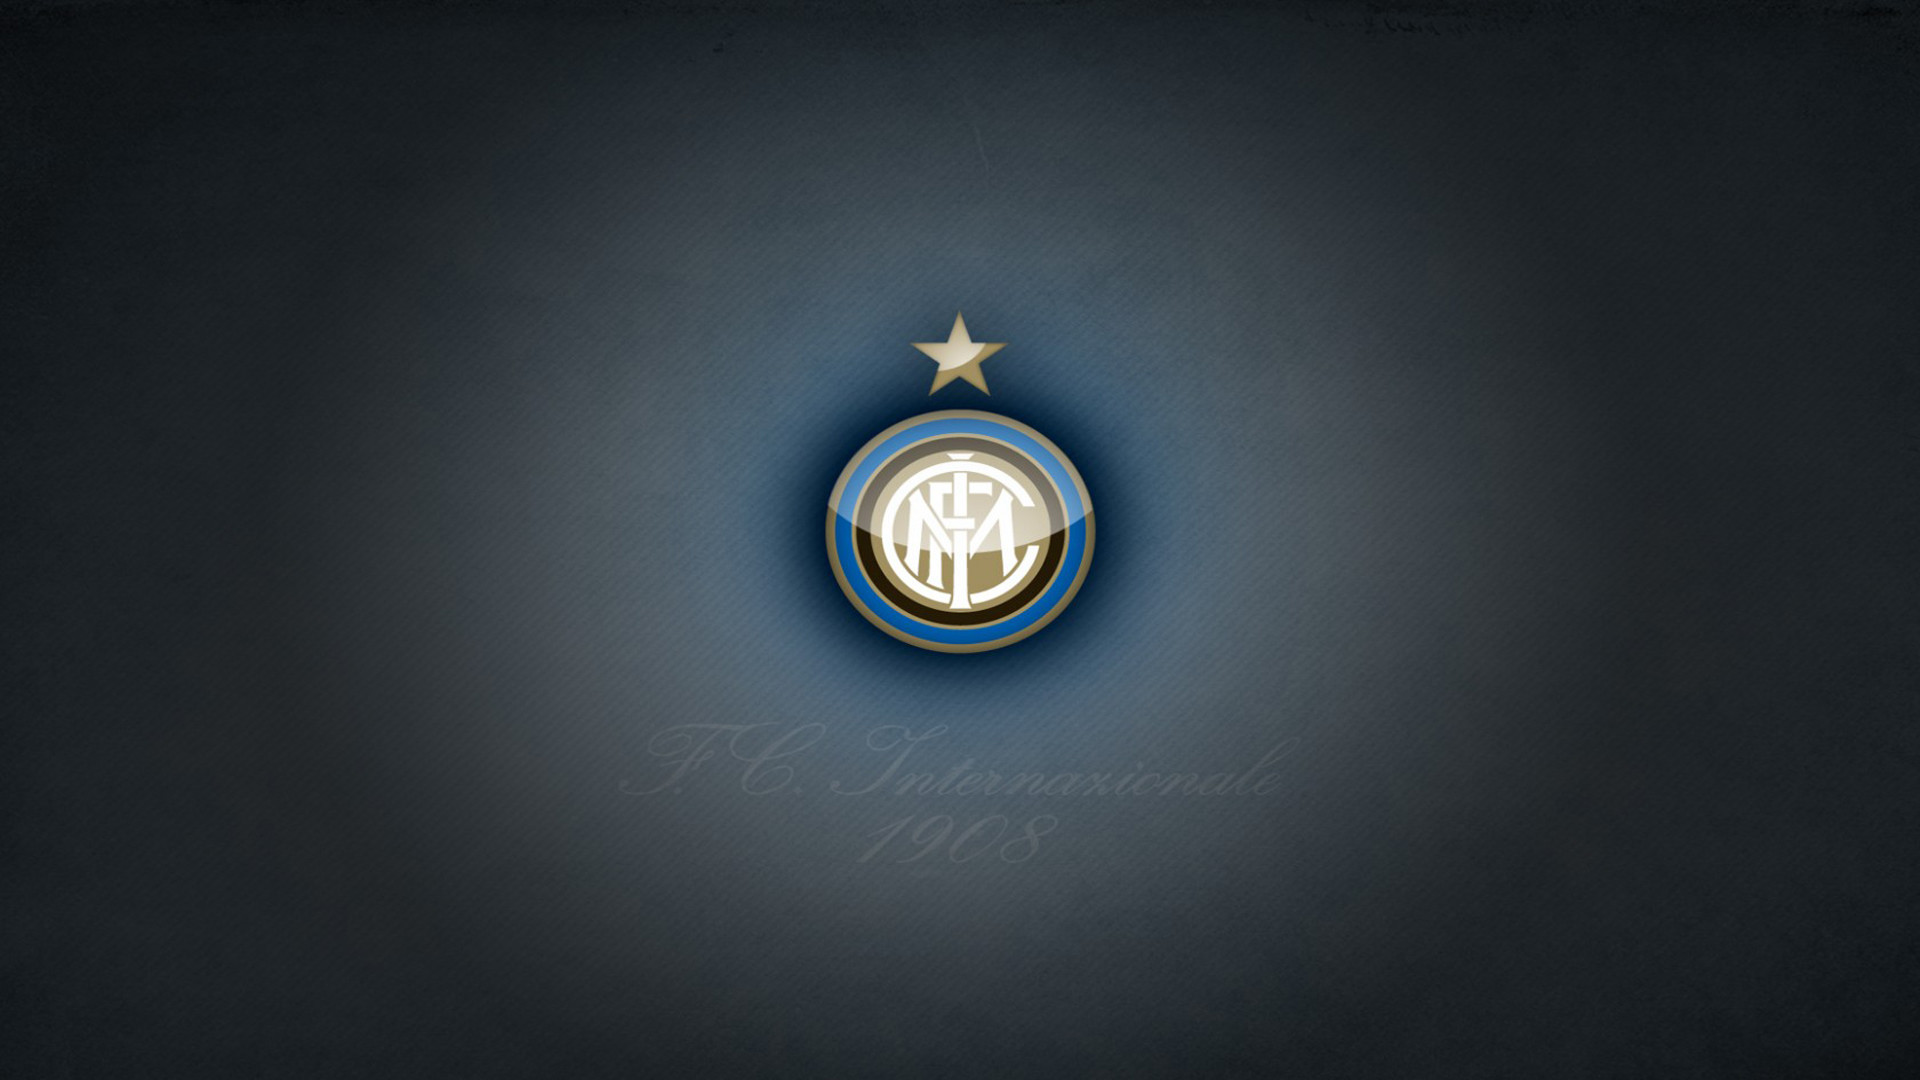 1920x1080 Download Fullsize Image Â· Inter inter fc internazionale Cool Soccer  Wallpapers 